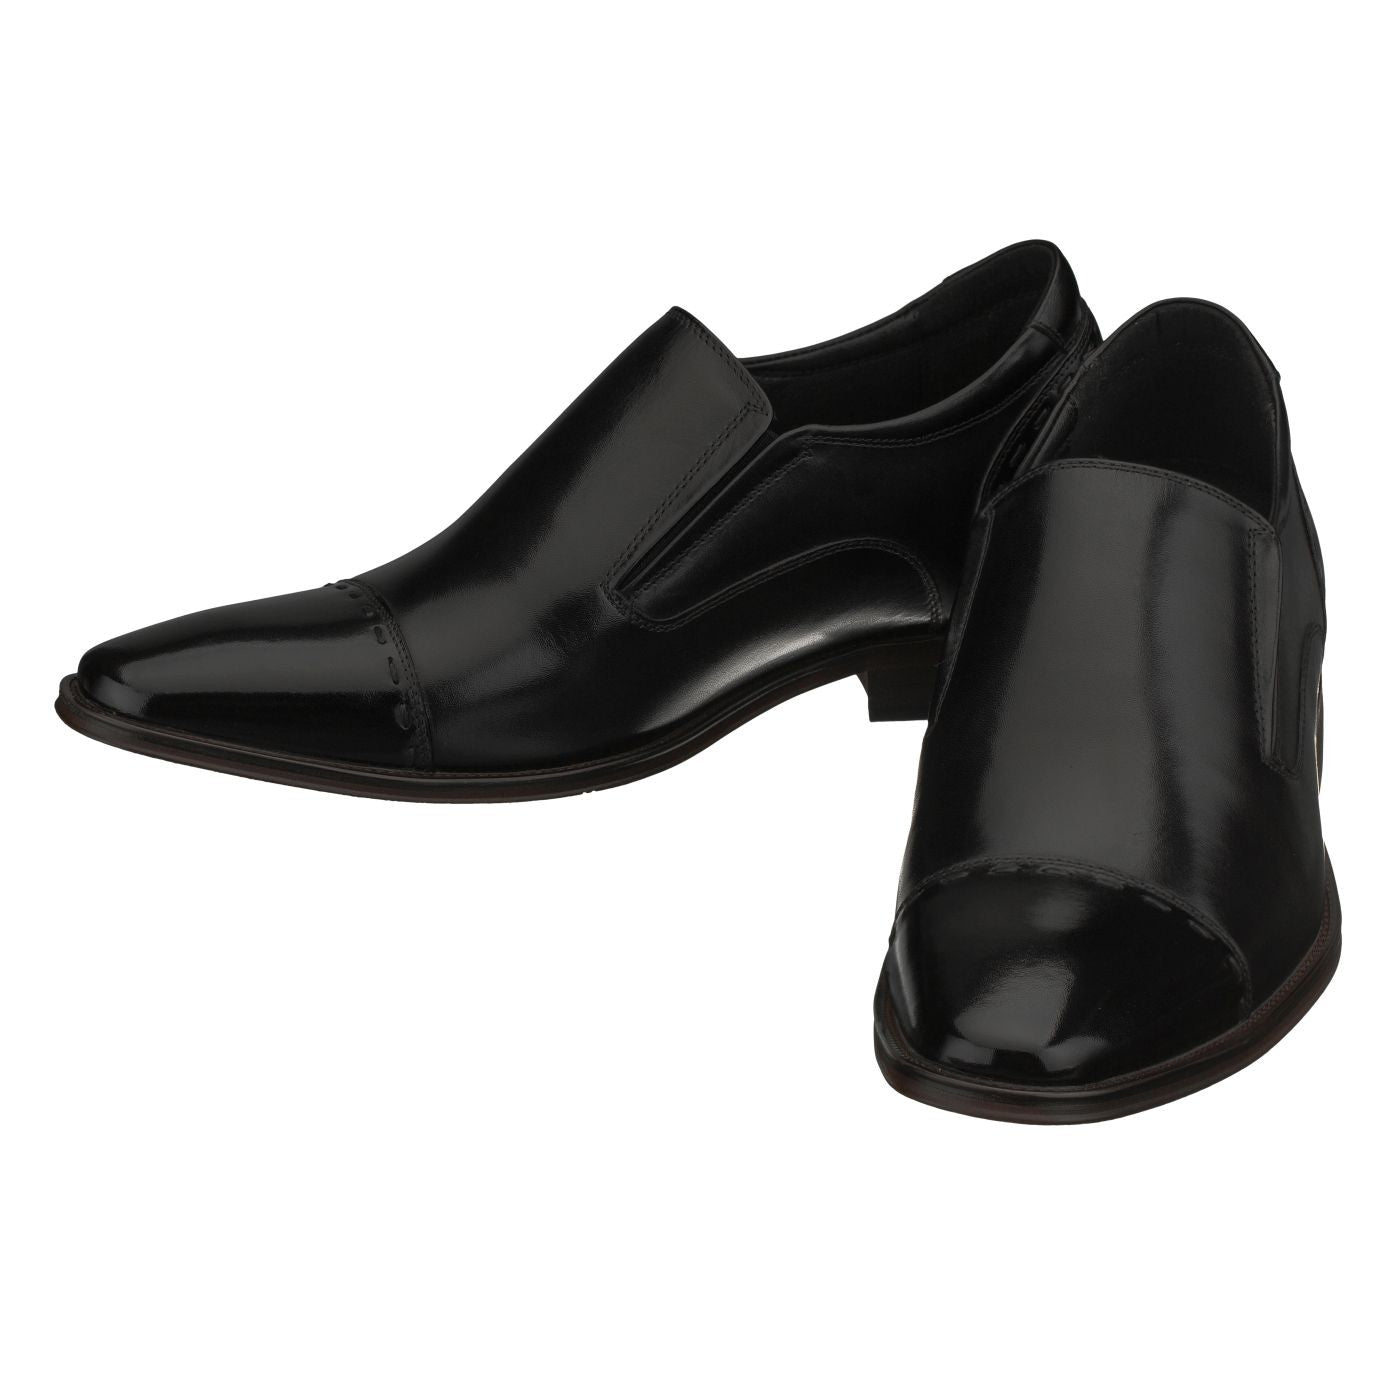 Elevator shoes height increase CALTO - Y5014 - 2.8 Inches Taller (Black)